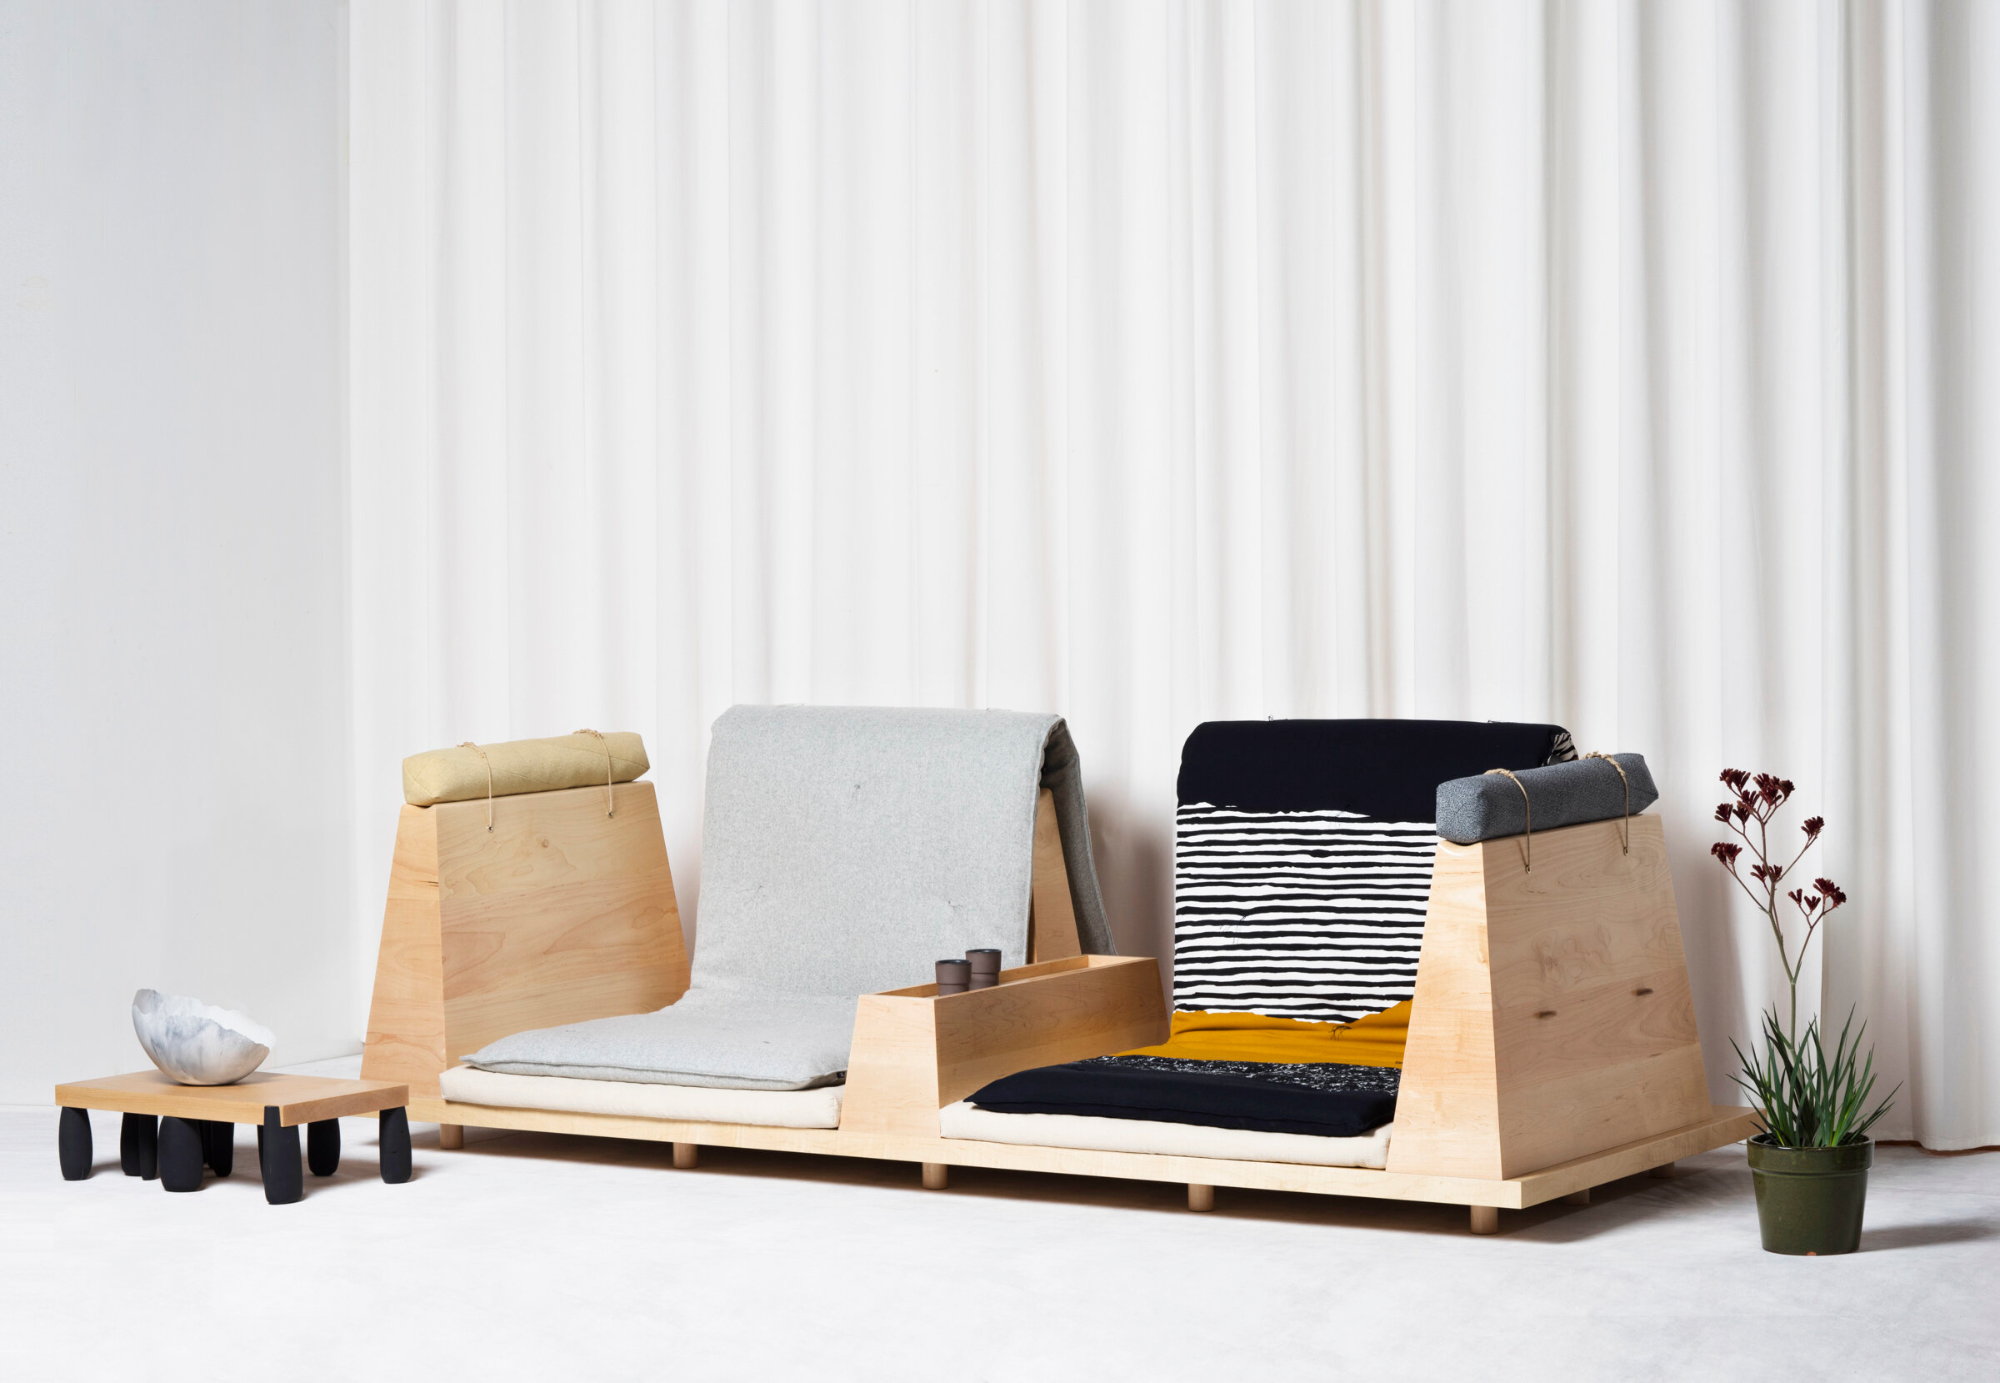 The simple wooden Zabuton Sofa from UMÉ takes inspiration from traditional Japanese floor mats. 